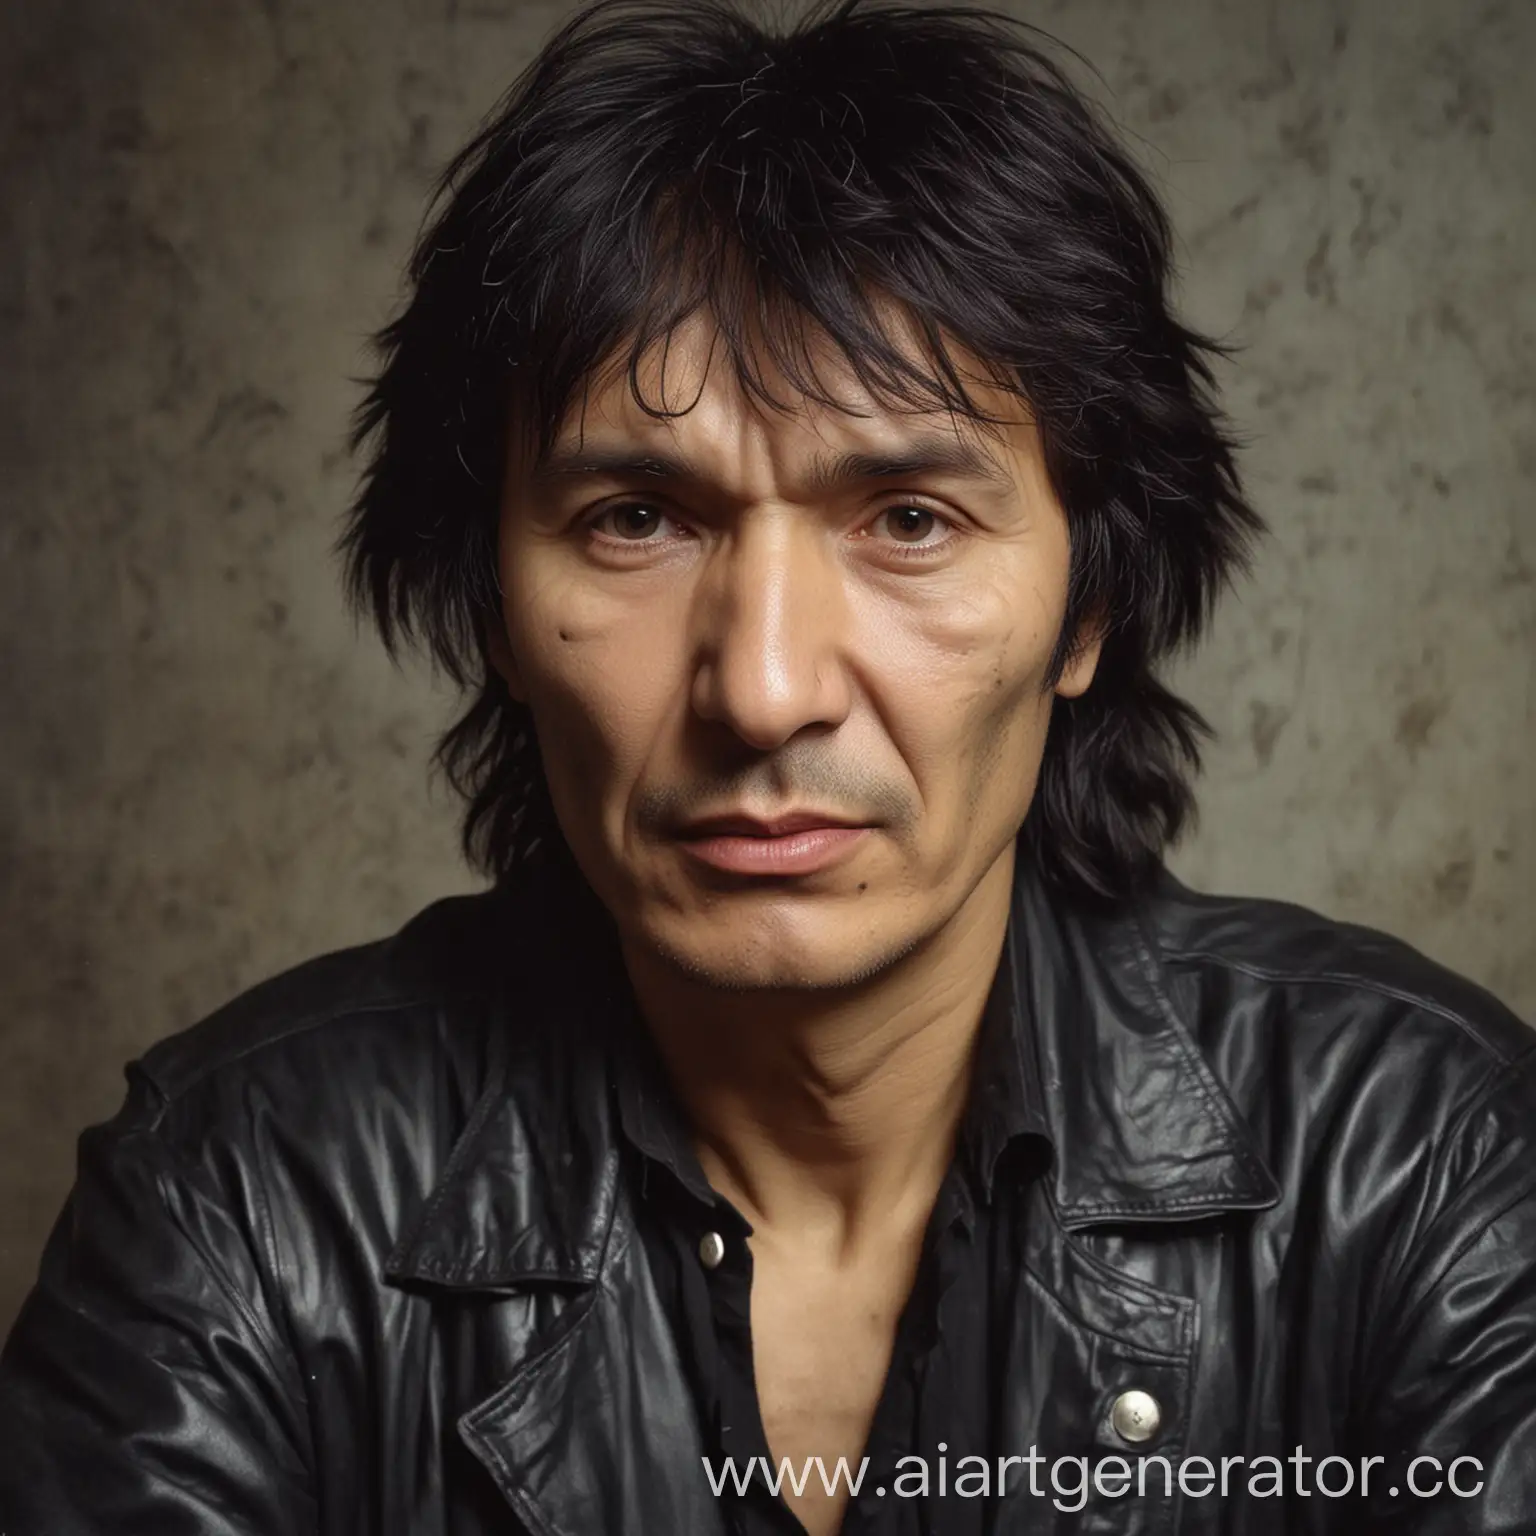 Viktor-Tsoi-in-Old-Age-Iconic-Musician-Reflecting-Times-Passage